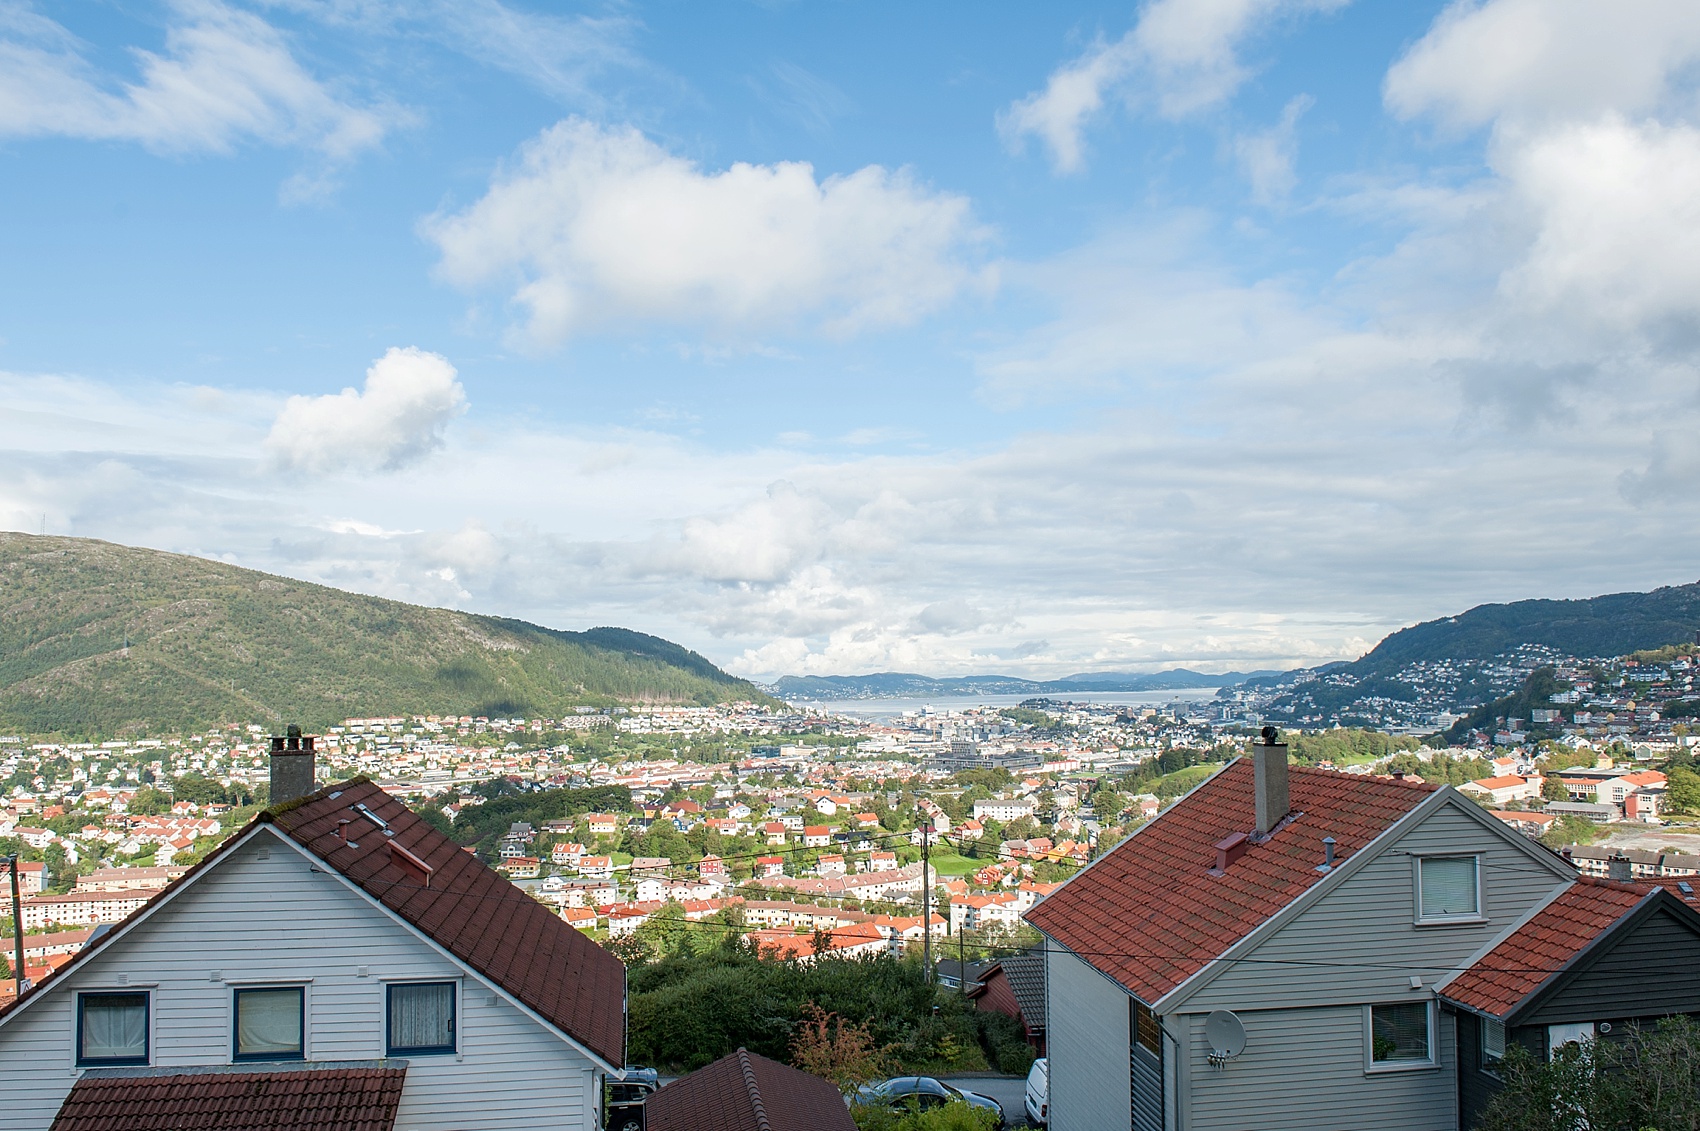 Bergen, Norway aerial view from a mountain. Bride prepares for her wedding day. Photos by Mikkel Paige Photography.